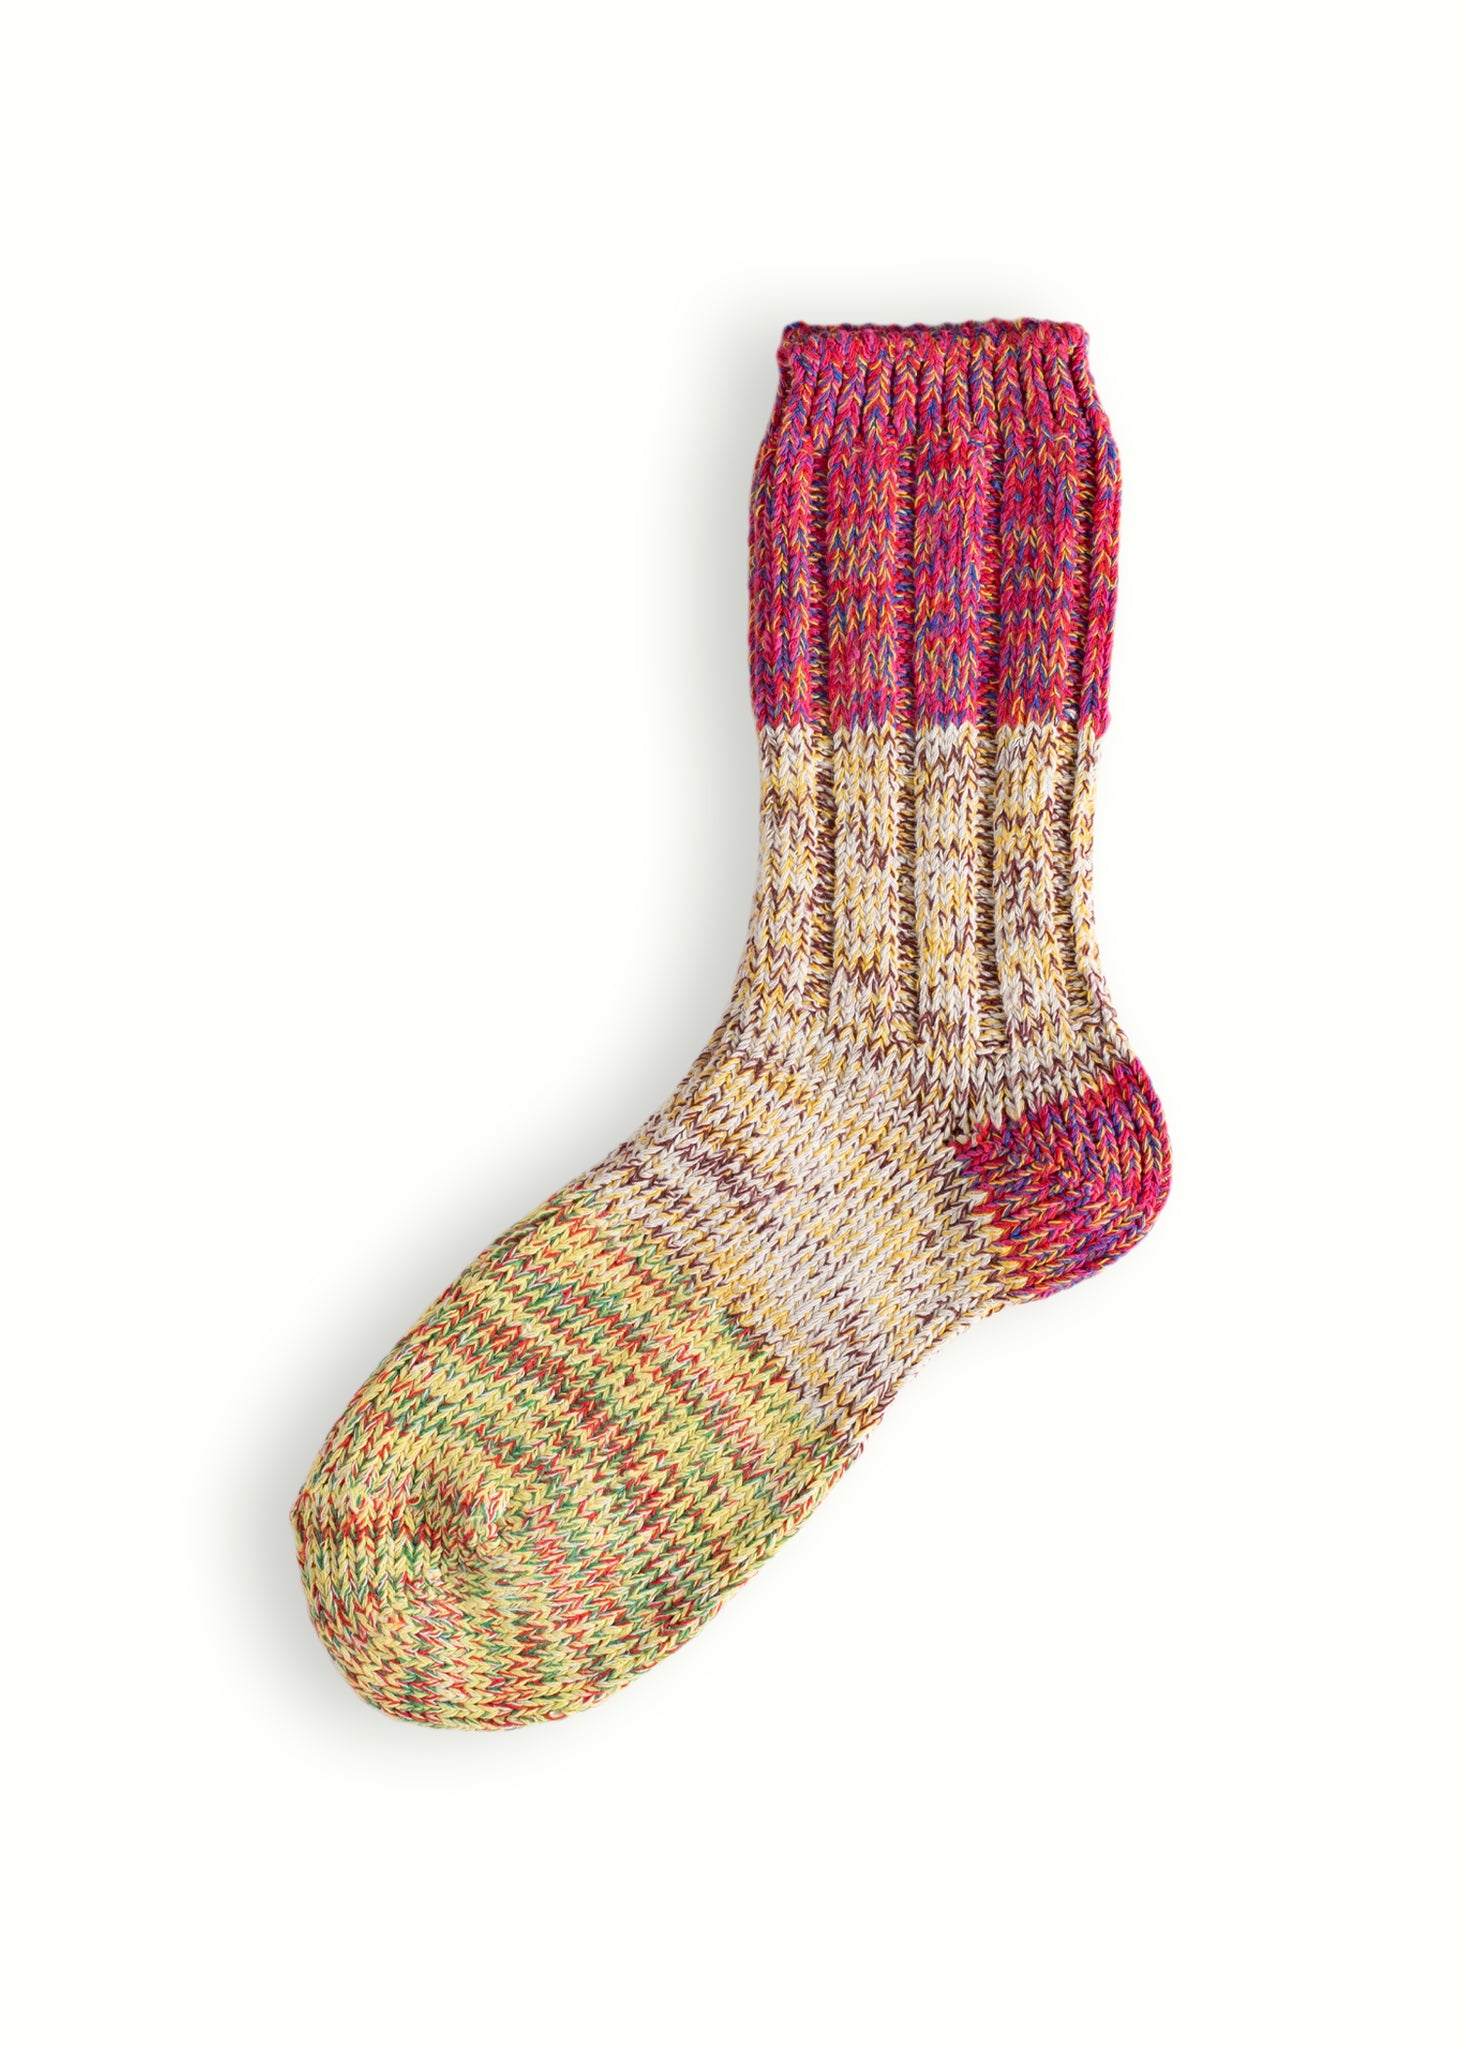 HELEN COLLECTION Red & Yellow Love Socks